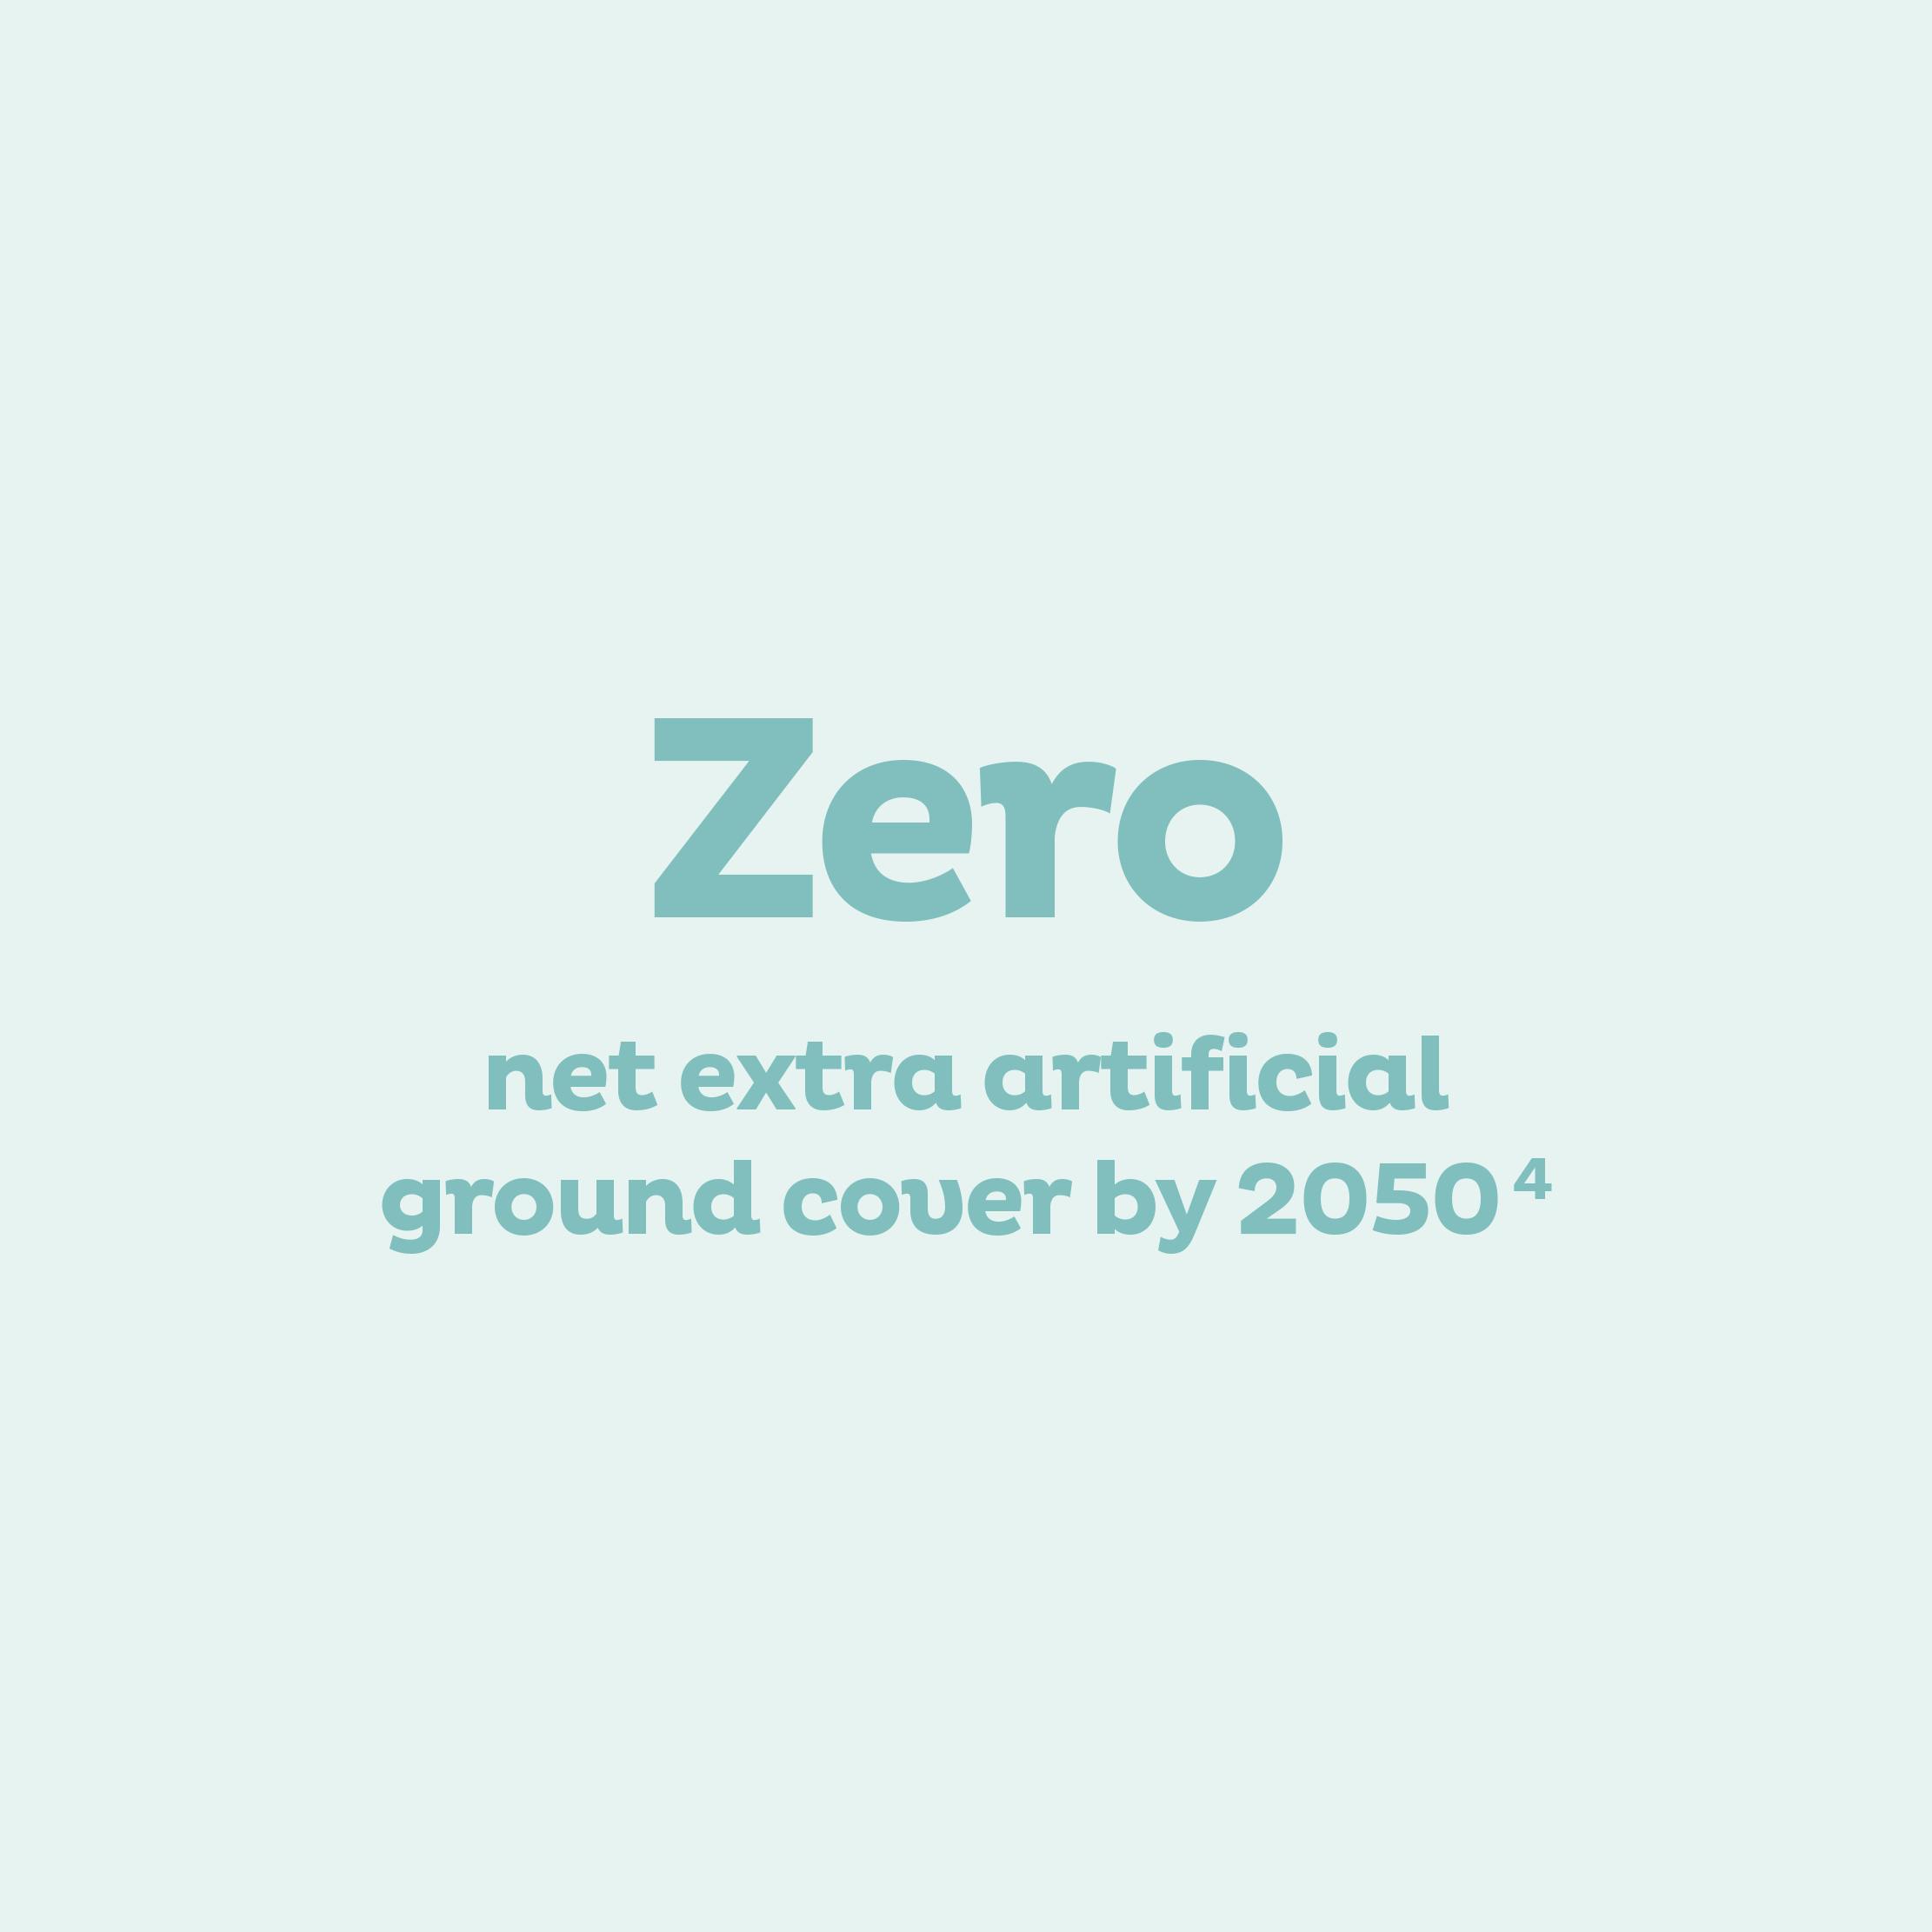 Zero net extra artificial ground cover by 20504